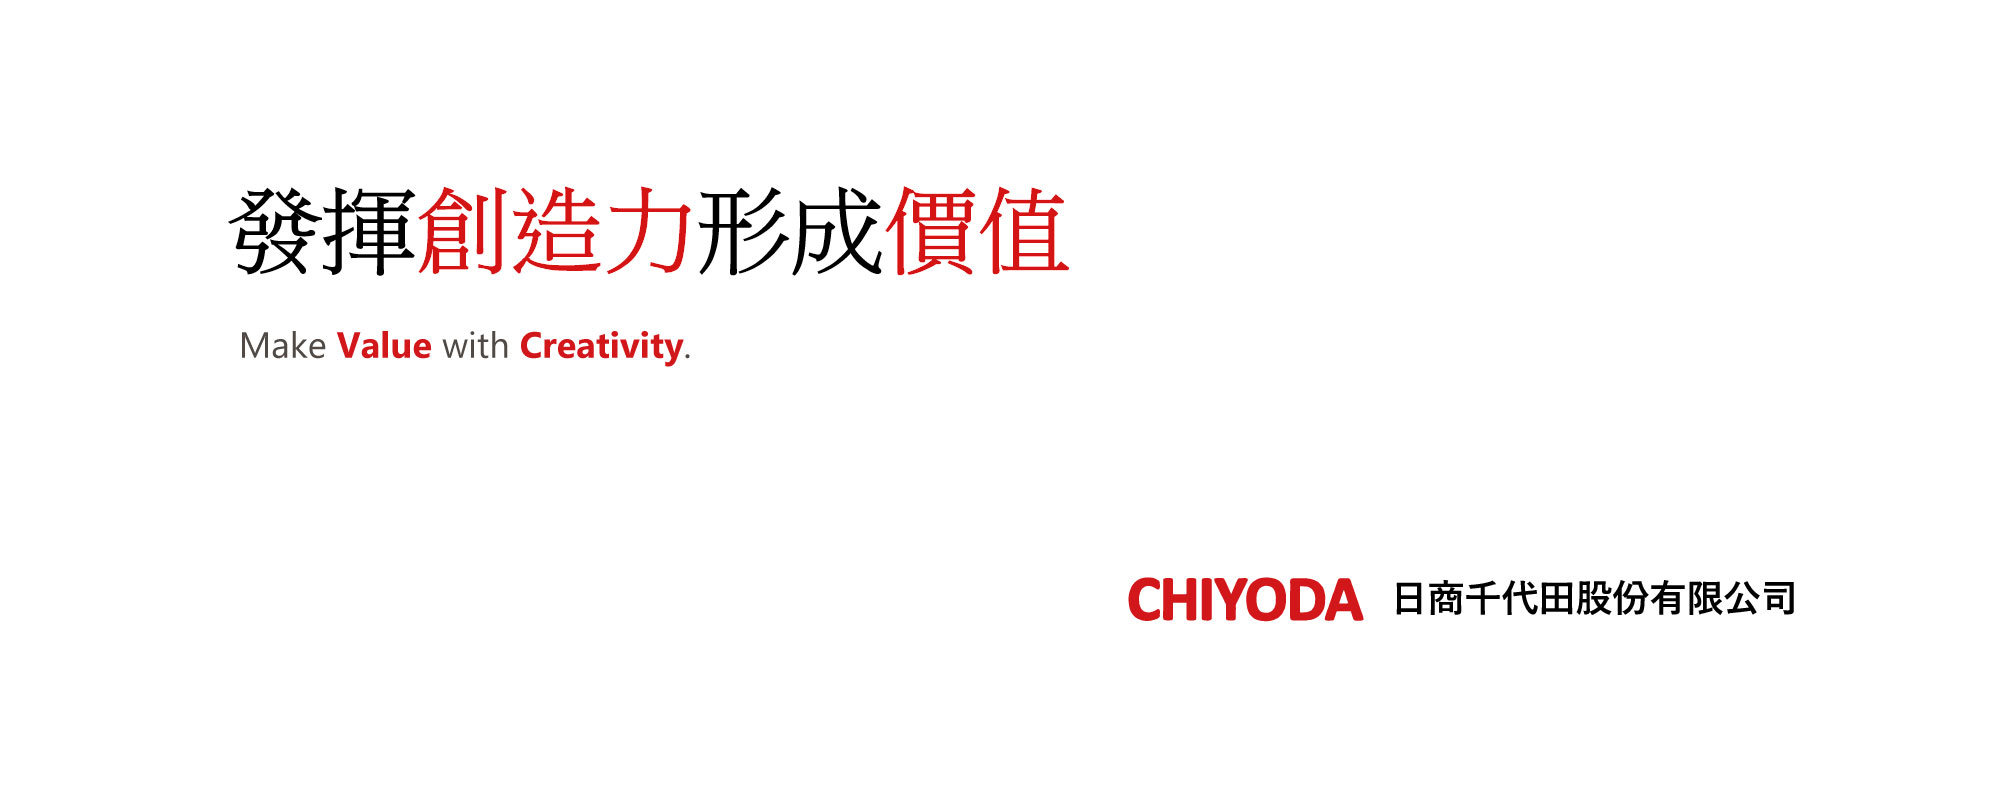 Make Value with Creativity. To shape a prosperous business future, we will realize what you want CHIYODA TRADING CORPORATION